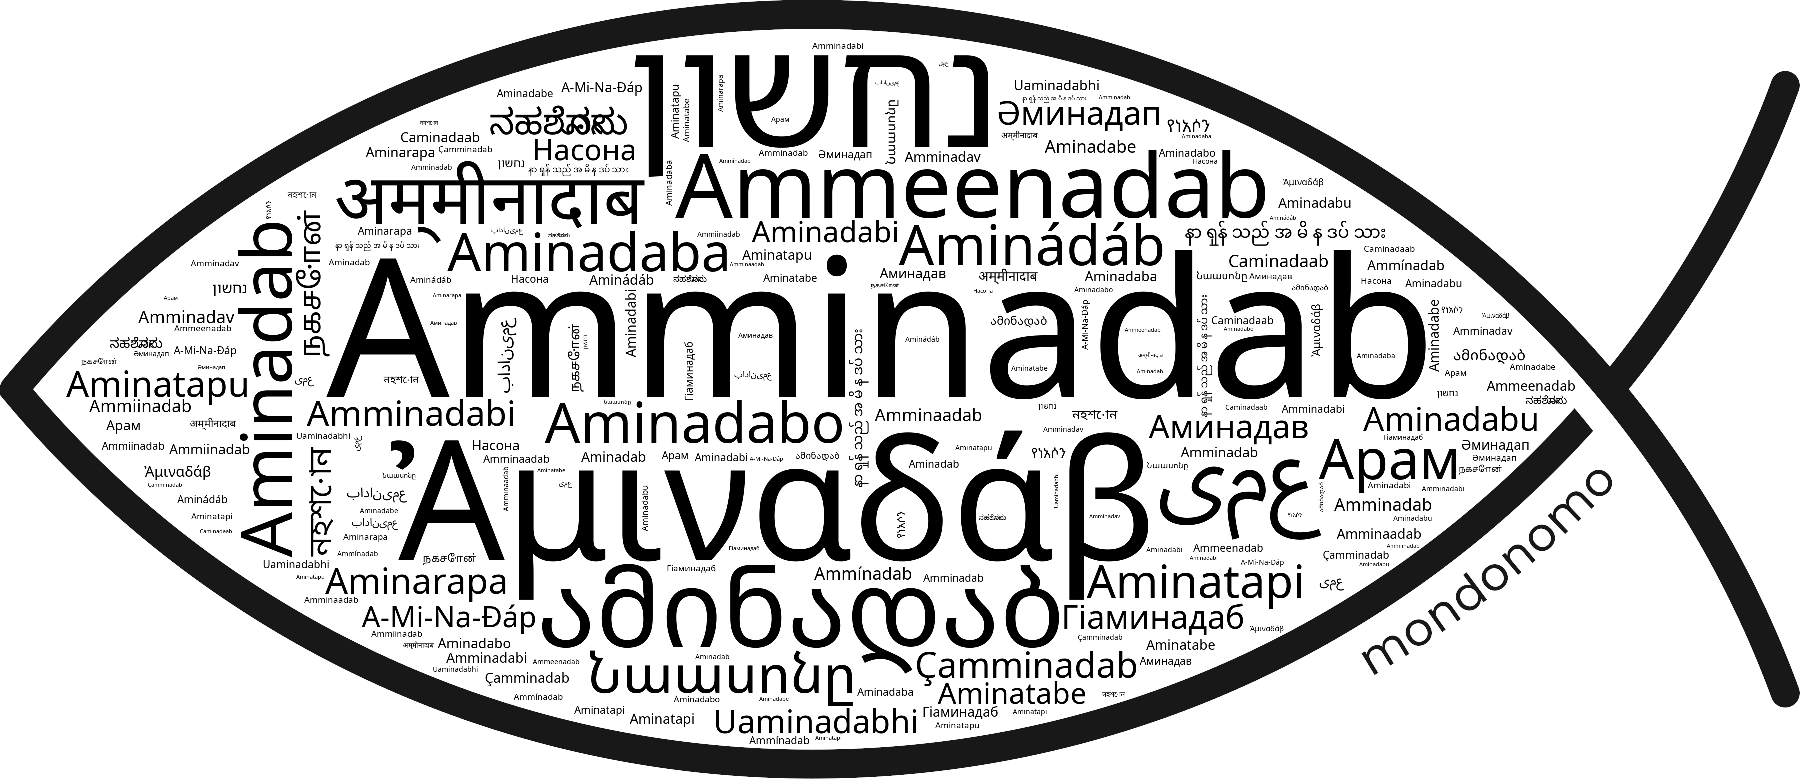 Name Amminadab in the world's Bibles